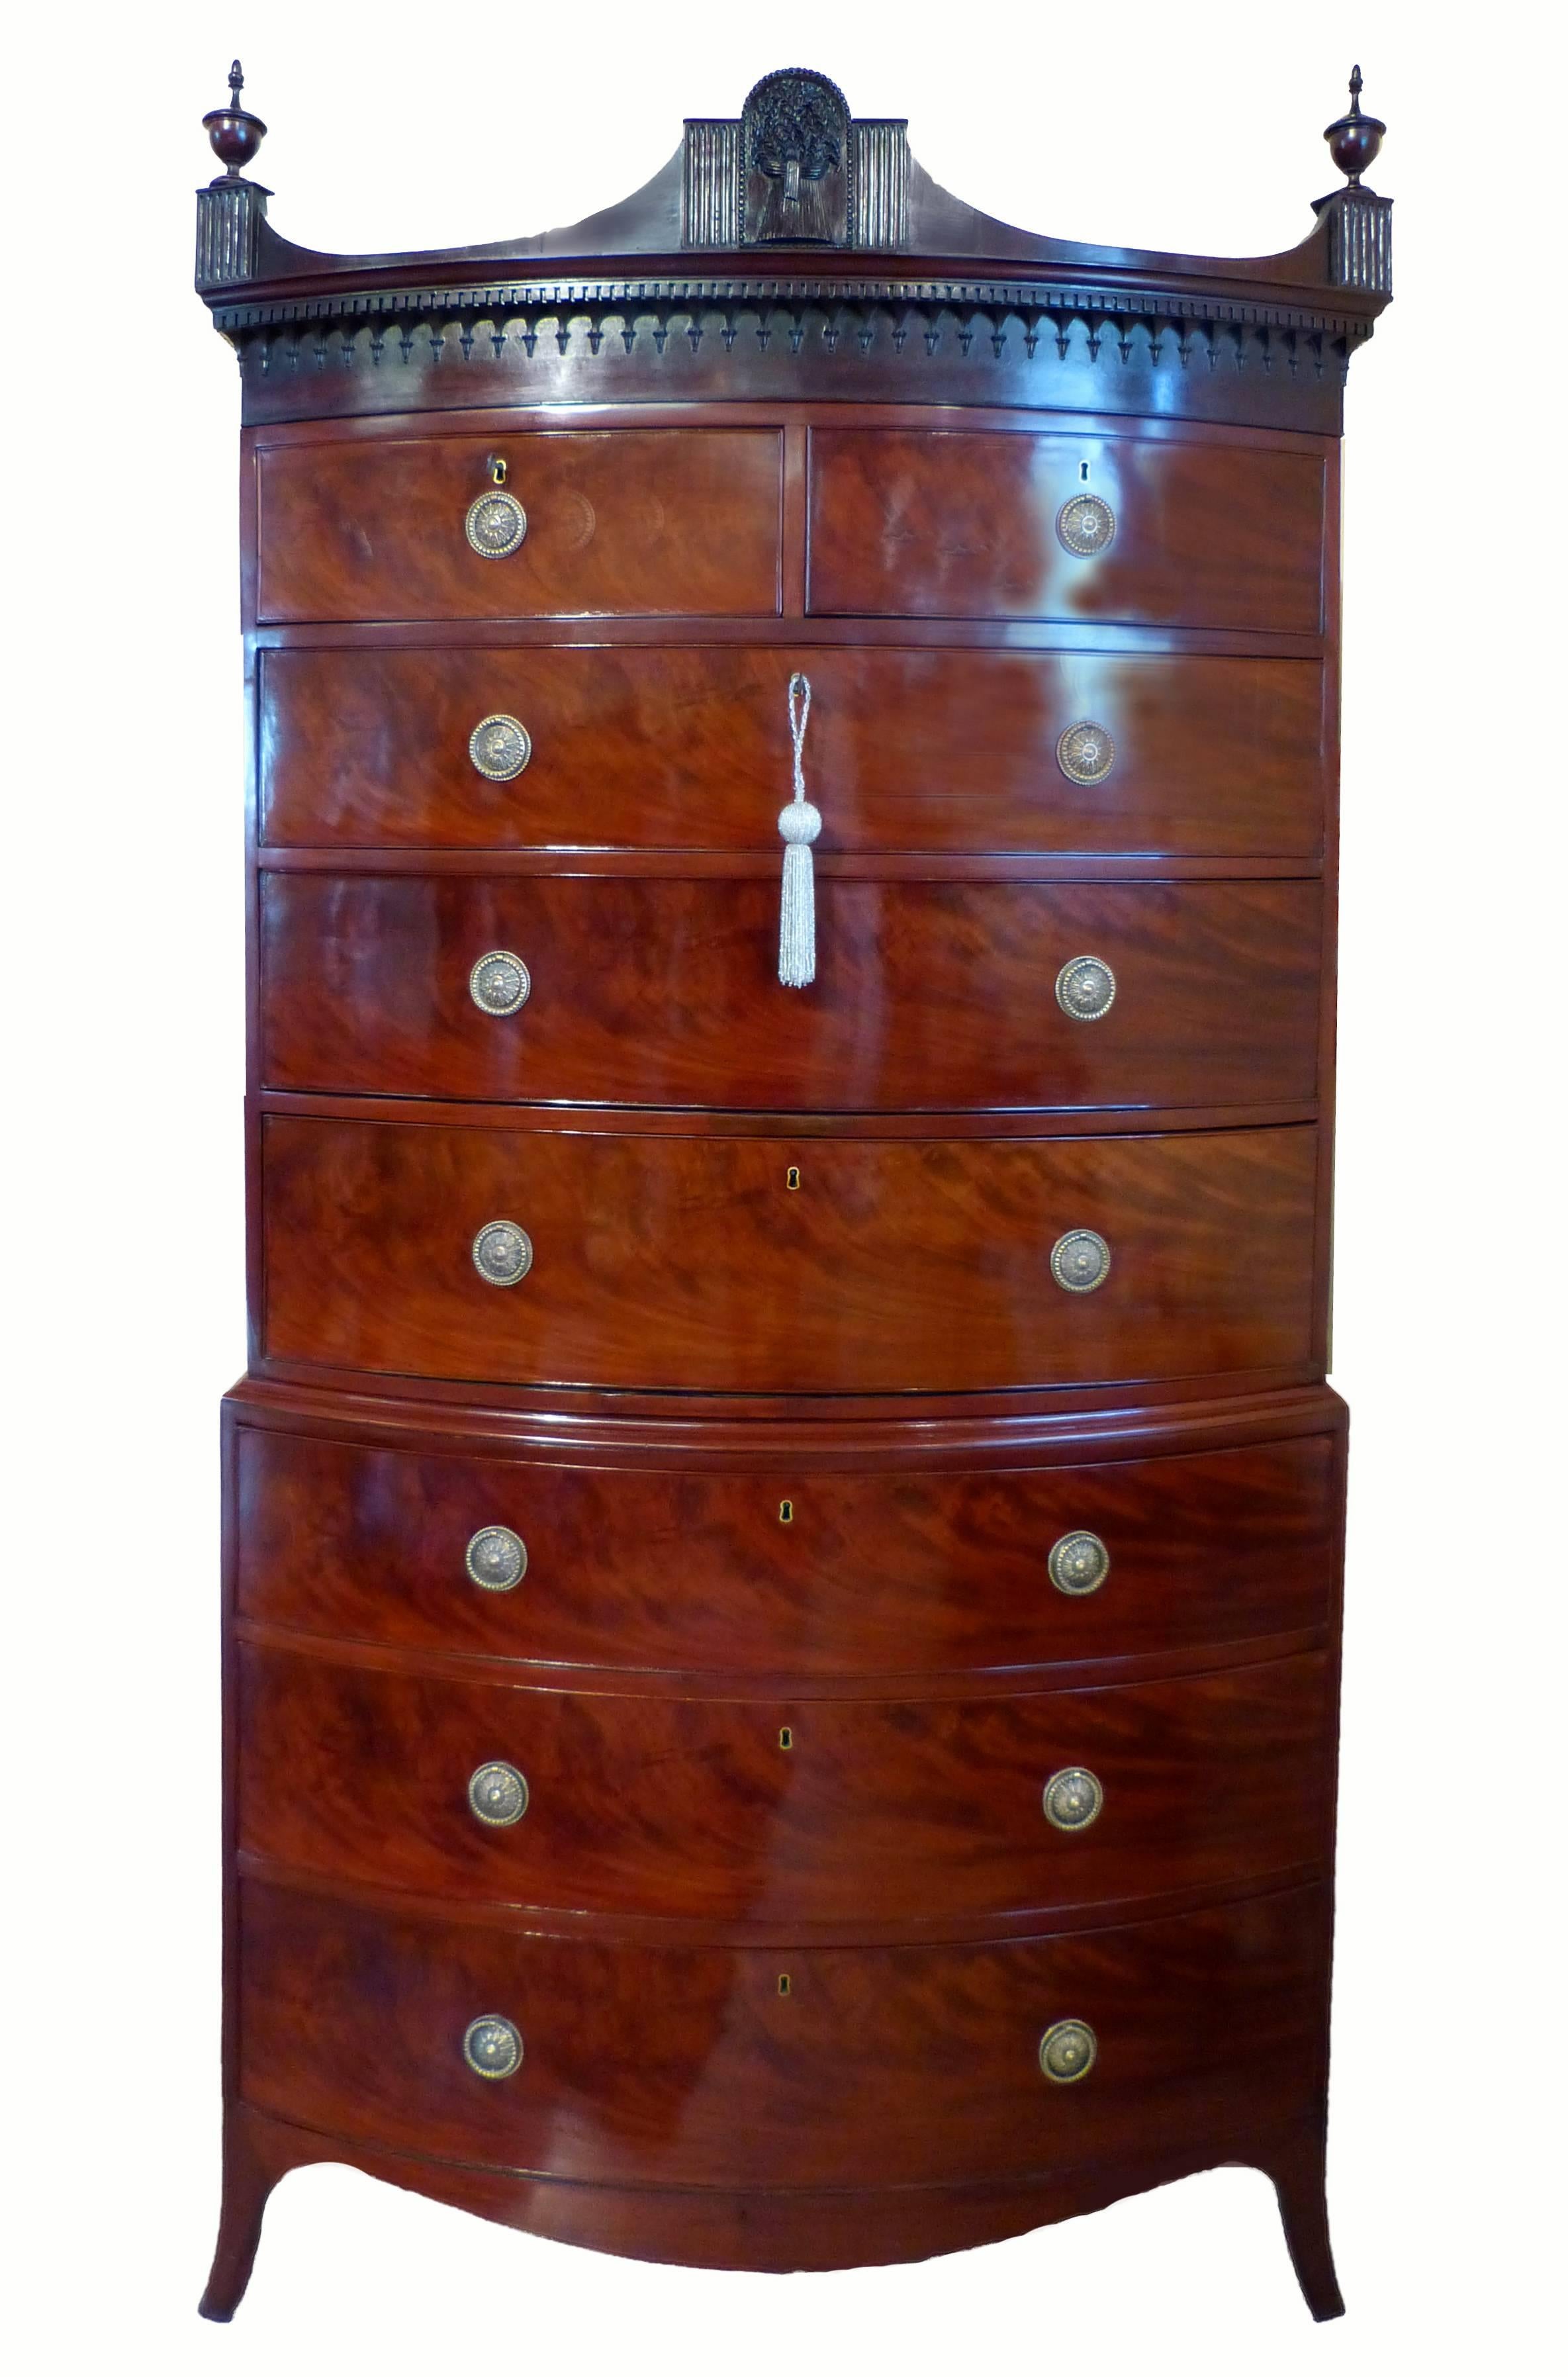 Fine and rare bow fronted chest on chest of the George III period in flame mahogany with the interior of the drawers of camphor wood and cedar. A Masterpiece of Georgian cabinet making of great proportions in the Hepplewhite style with out-splayed